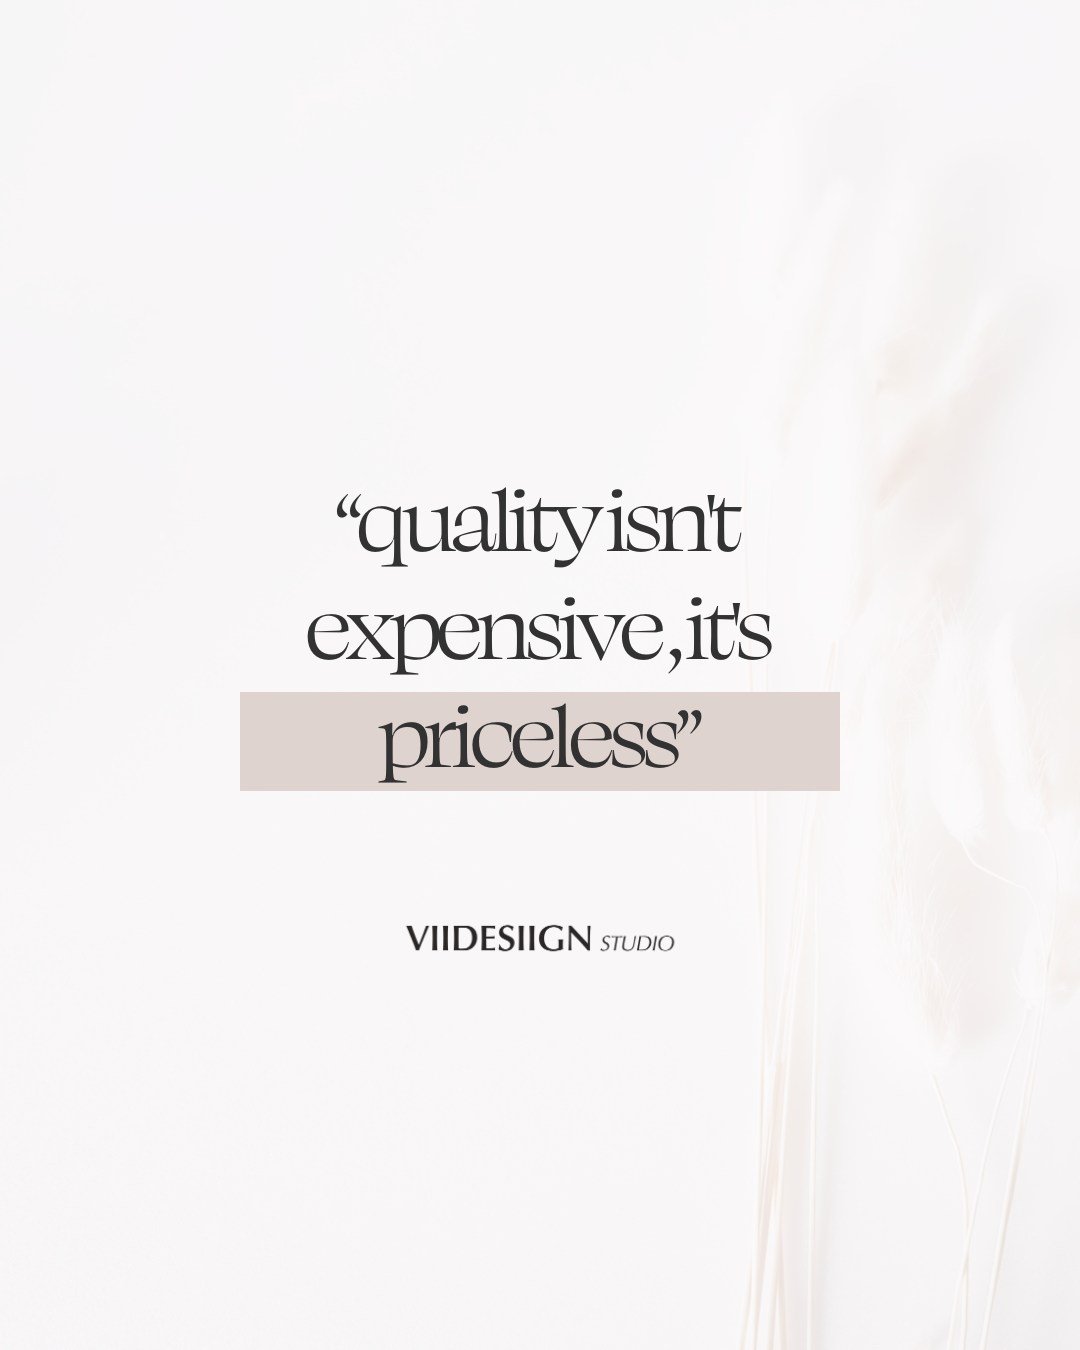 Delivering nothing but excellence in every detail 💎

At VIIDESIIGN Studio, we aim to provide services and experiences that exceed expectations.

If you're looking for genuine quality, look no further than our studio 💖

Schedule your complimentary d